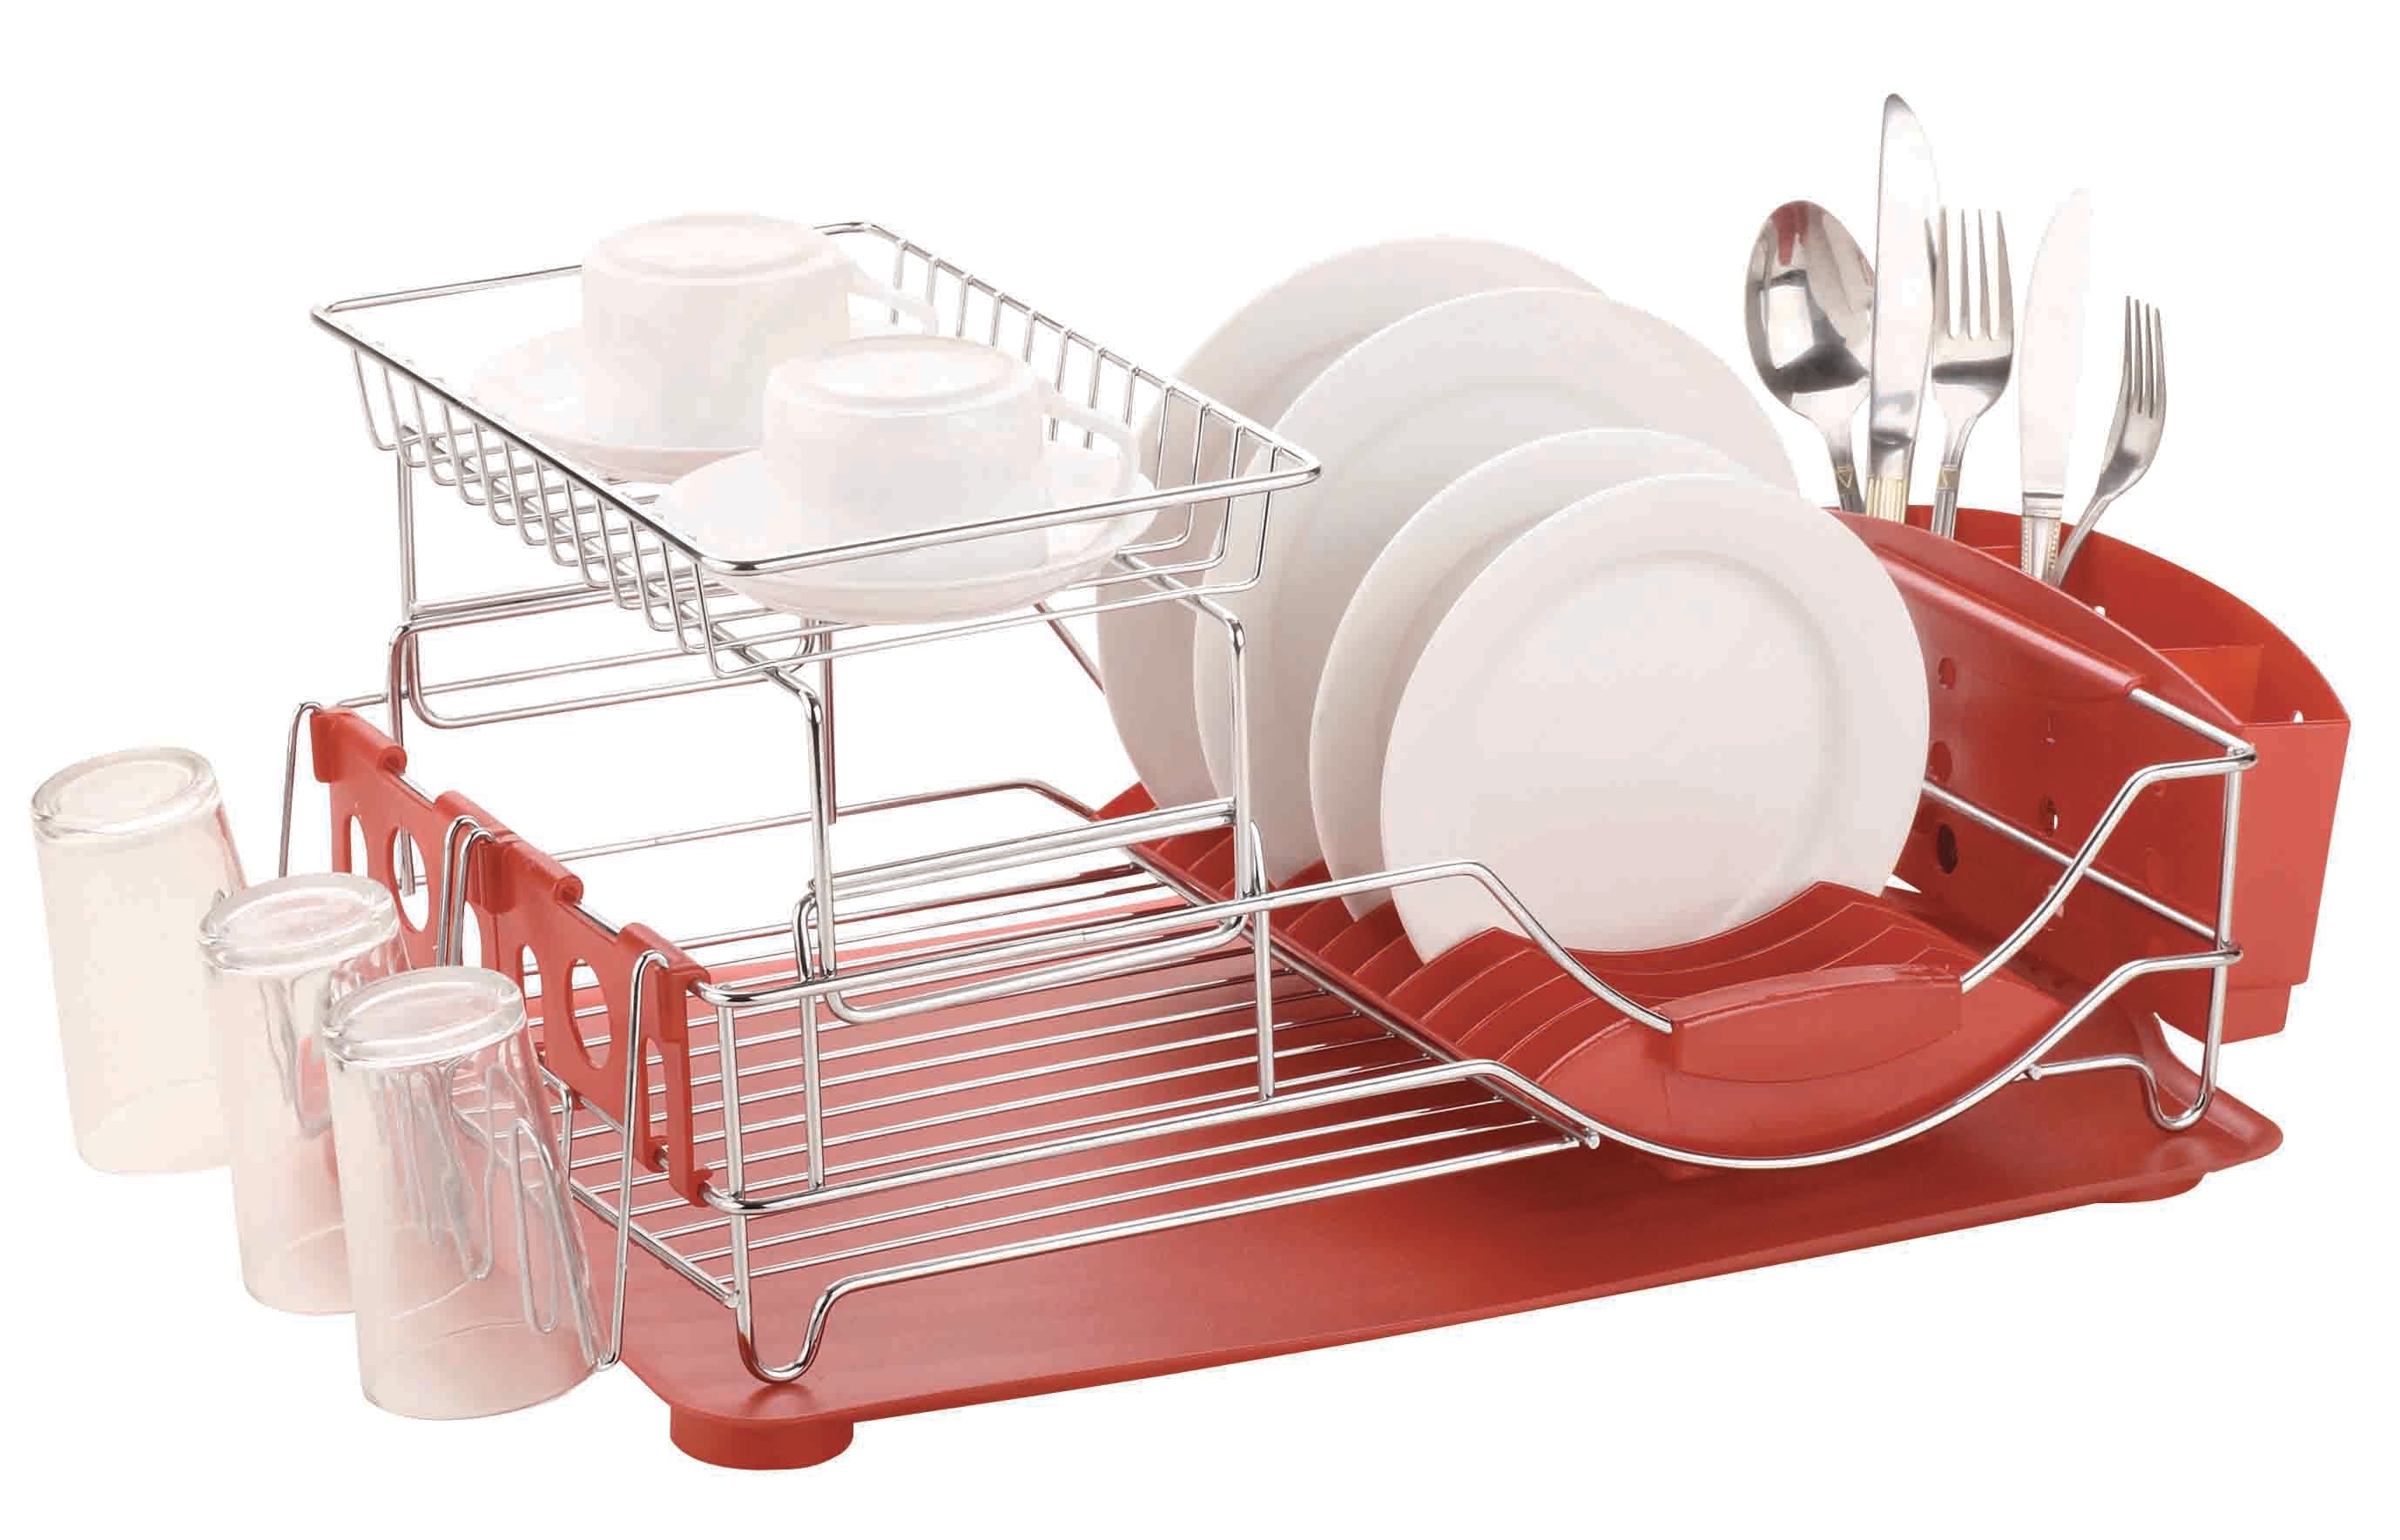 Home Basics 2 Tier Deluxe Chrome Dish Rack Drainer, Red, 20x13x10 Inches